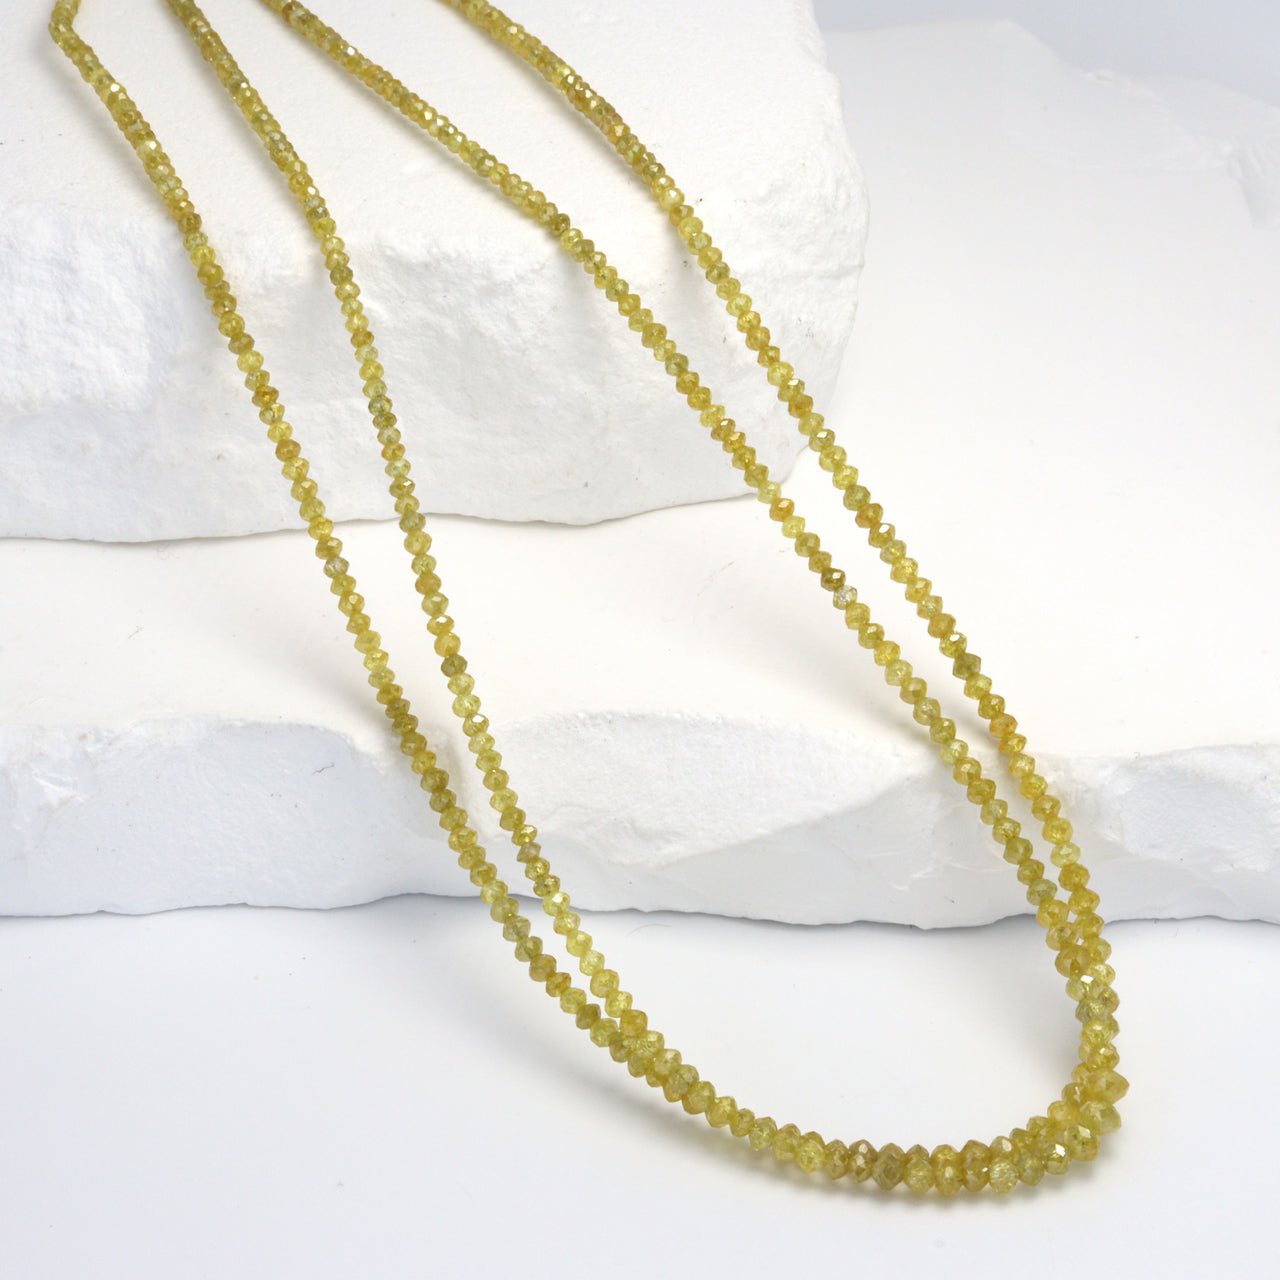 Yellow Diamond 2mm Faceted Rondelles